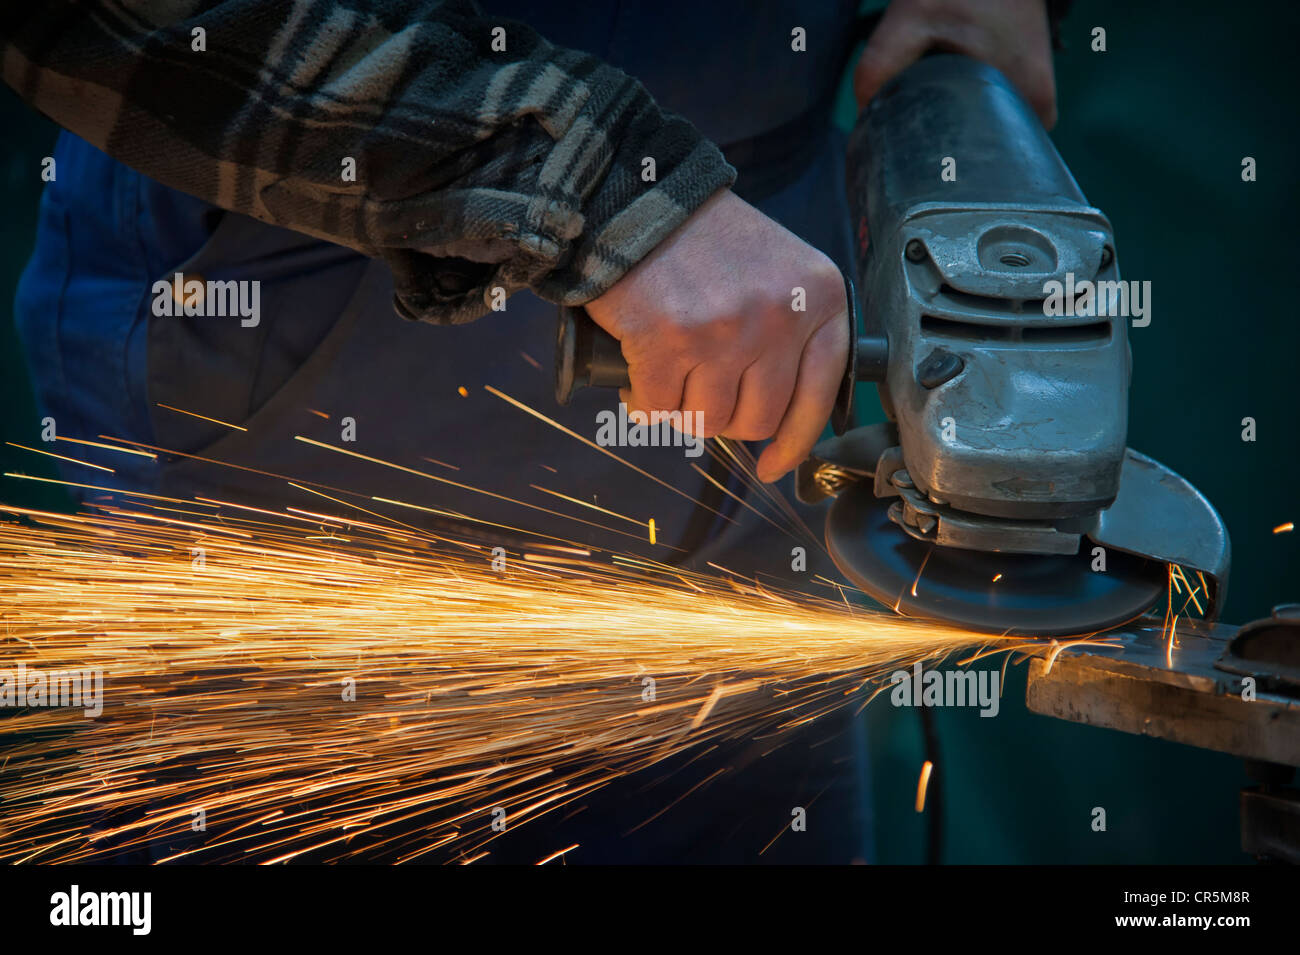 Hands of a worker using an angle grinder Stock Photo